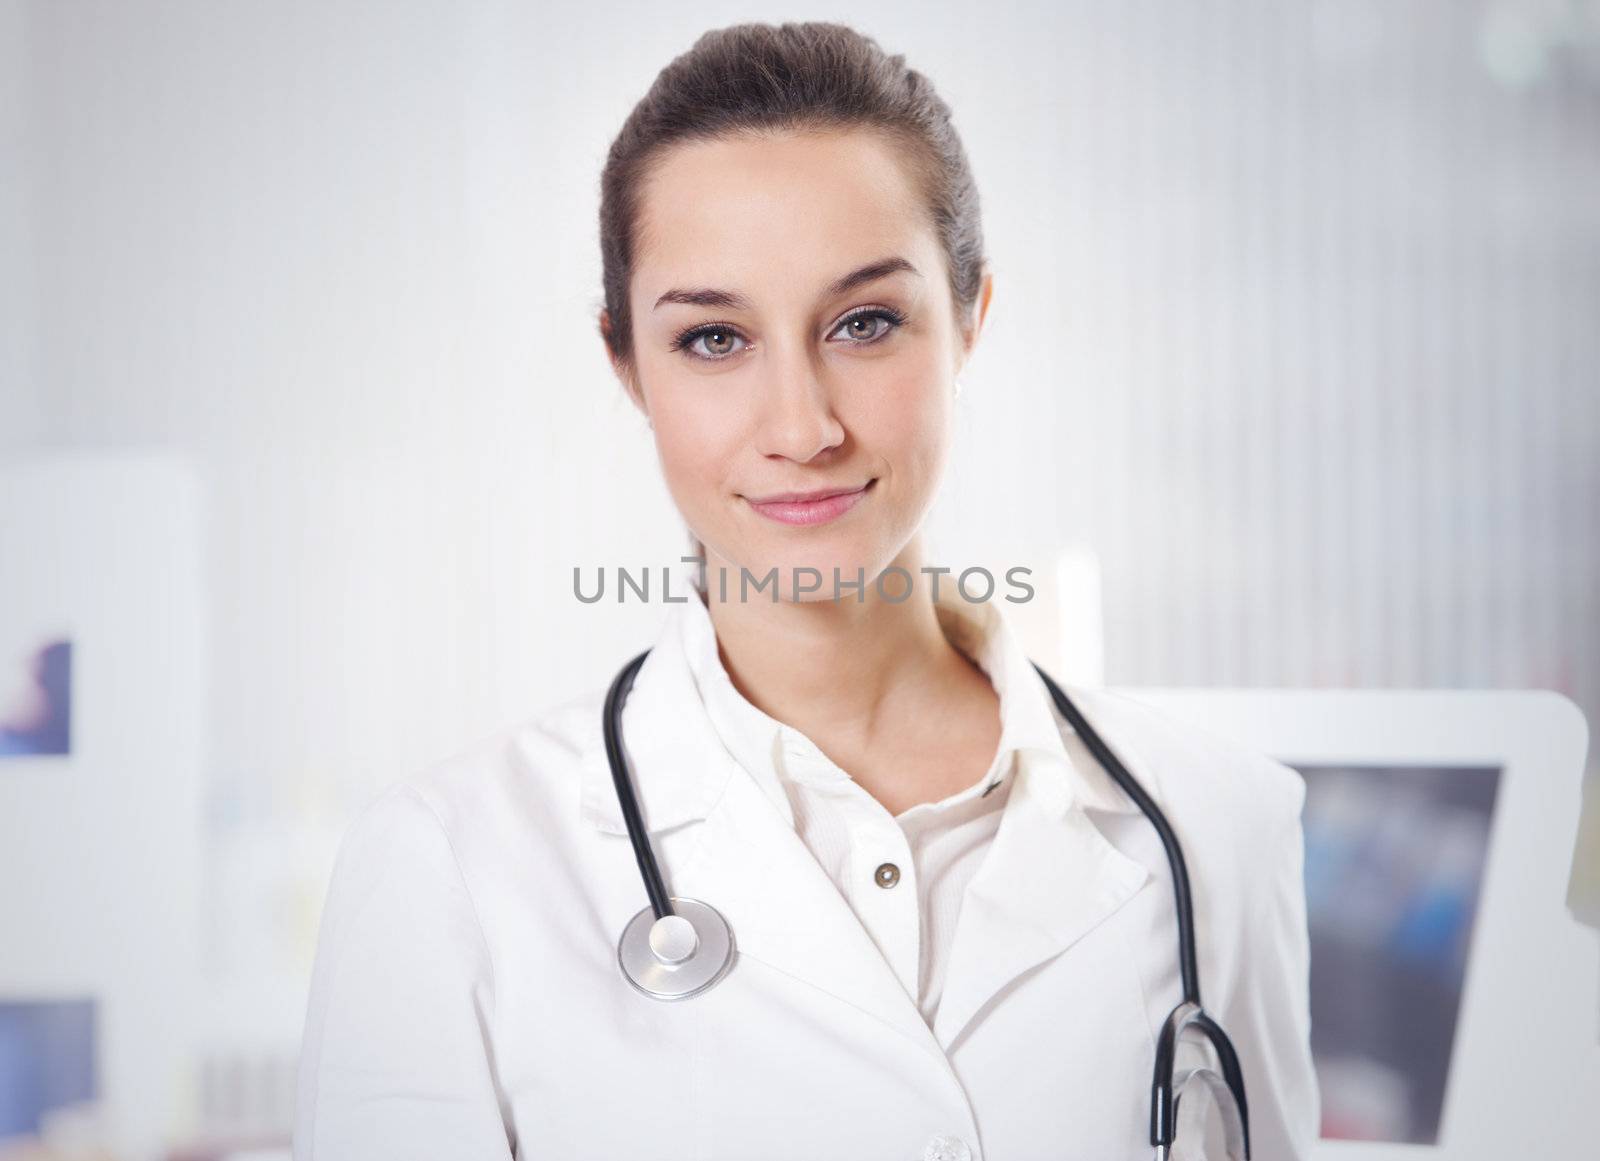 at pharmacy: portrait of  smiling young woman pharmacist with stethoscope